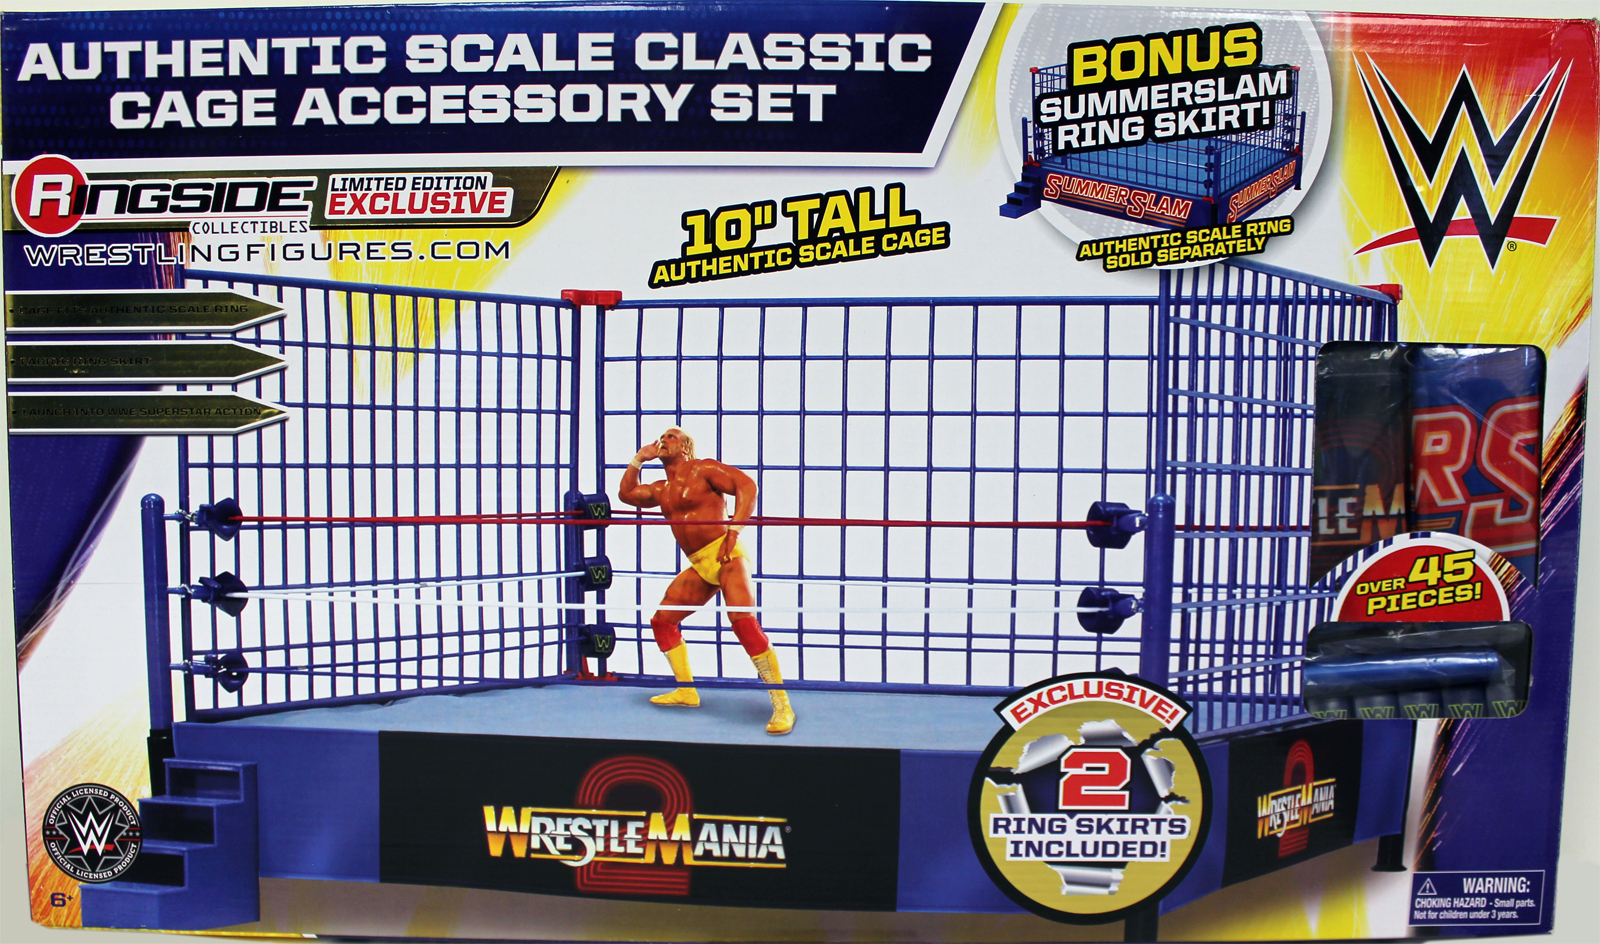 0090125254143 - WWE CLASSIC BLUE STEEL CAGE PLAYSET W/ 2 RING SKIRTS - RINGSIDE COLLECTIBLES EXCLUSIVE TOY WRESTLING ACTION FIGURE PLAYSET